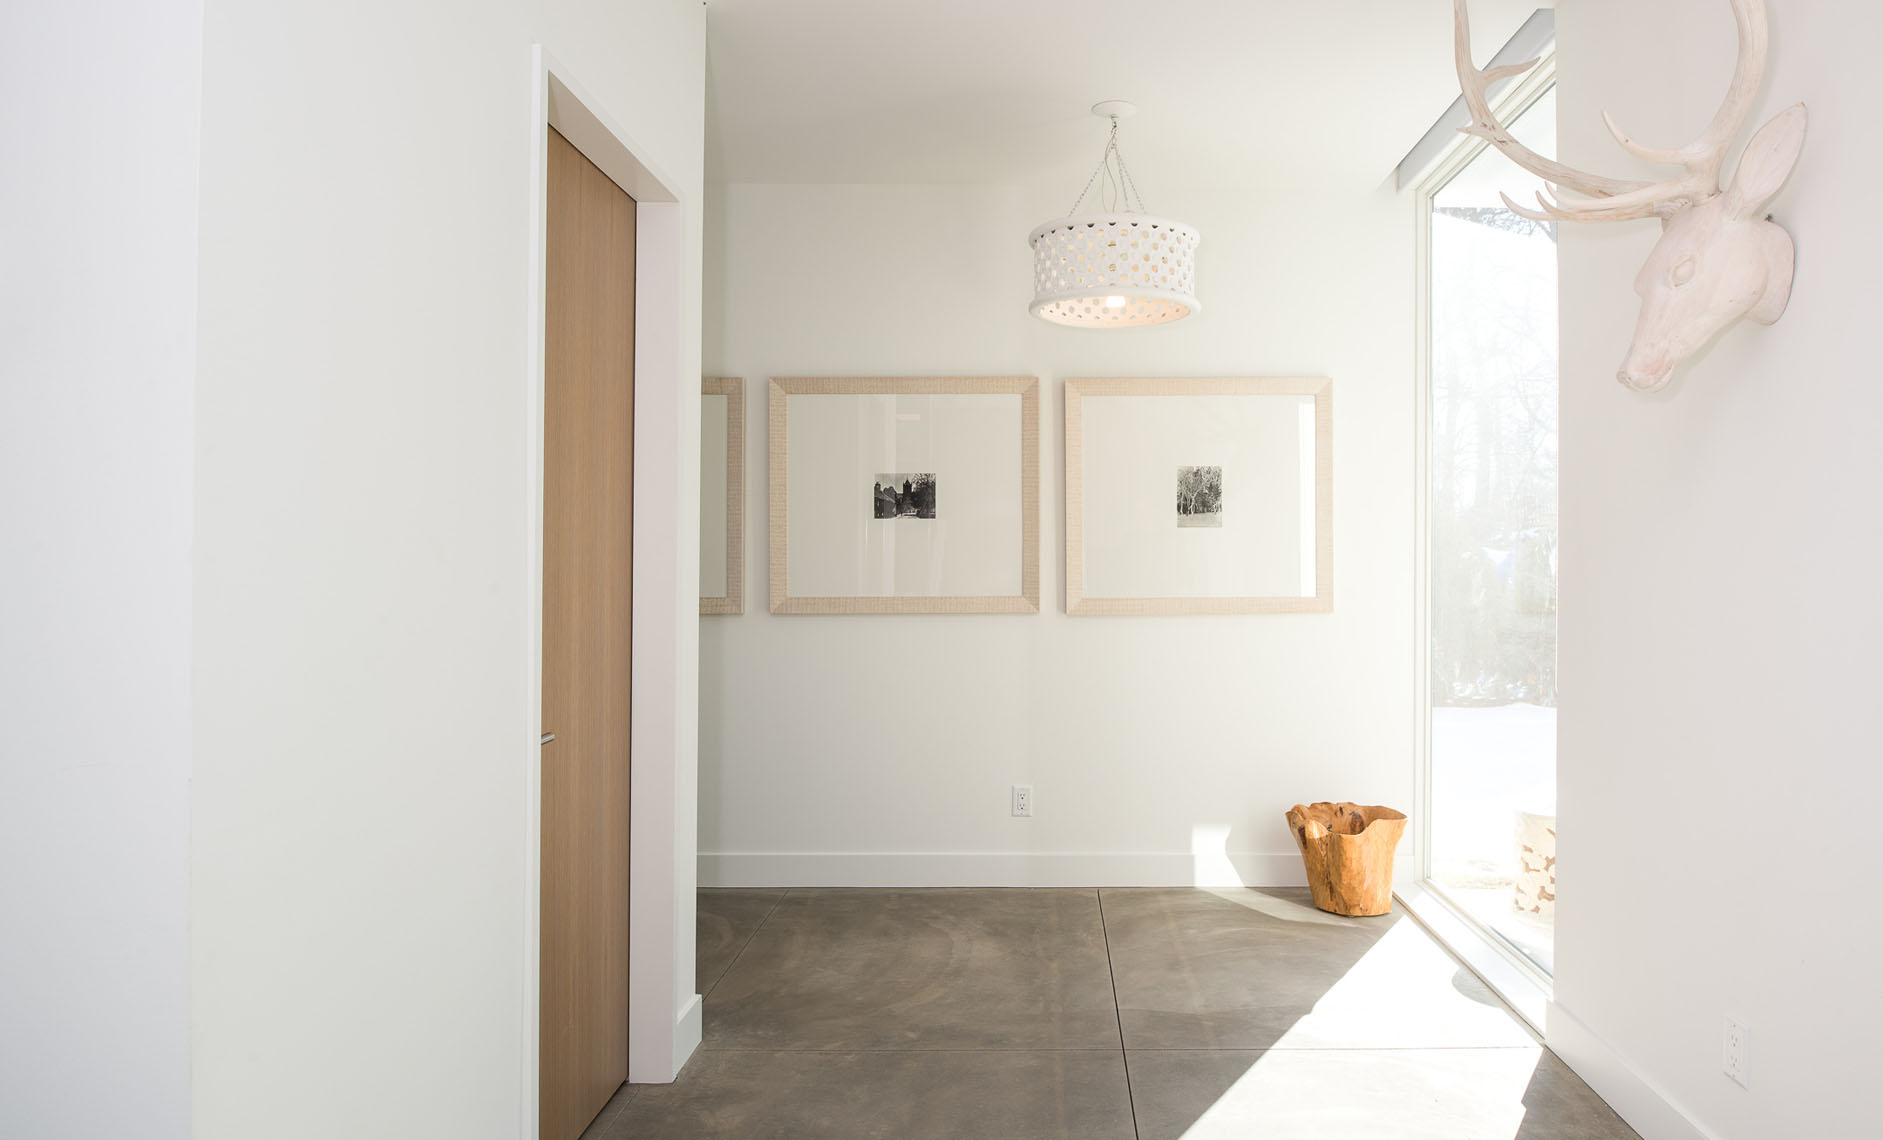 Hallway with a concrete floor and white walls